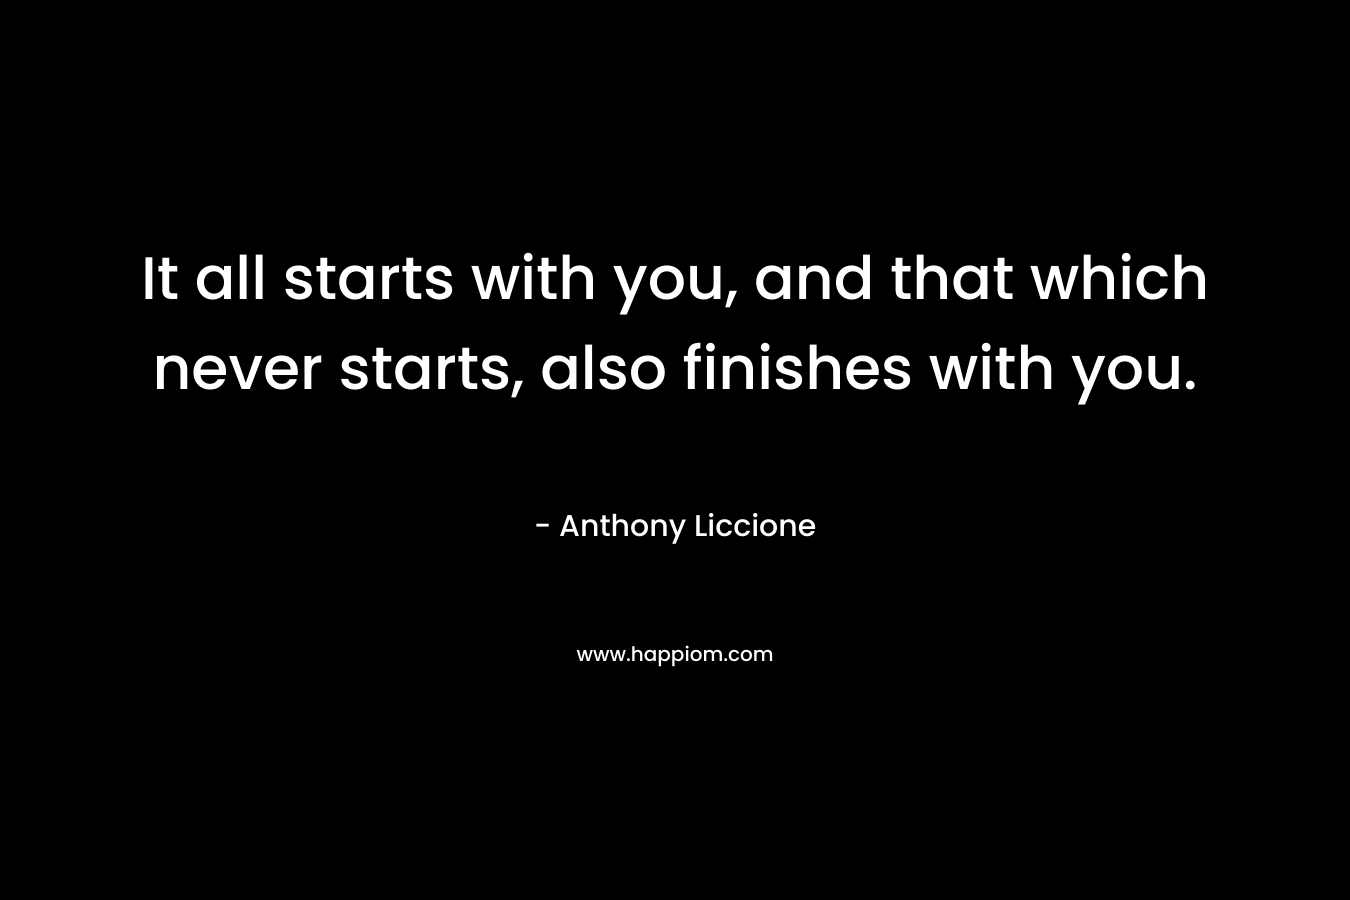 It all starts with you, and that which never starts, also finishes with you. – Anthony Liccione